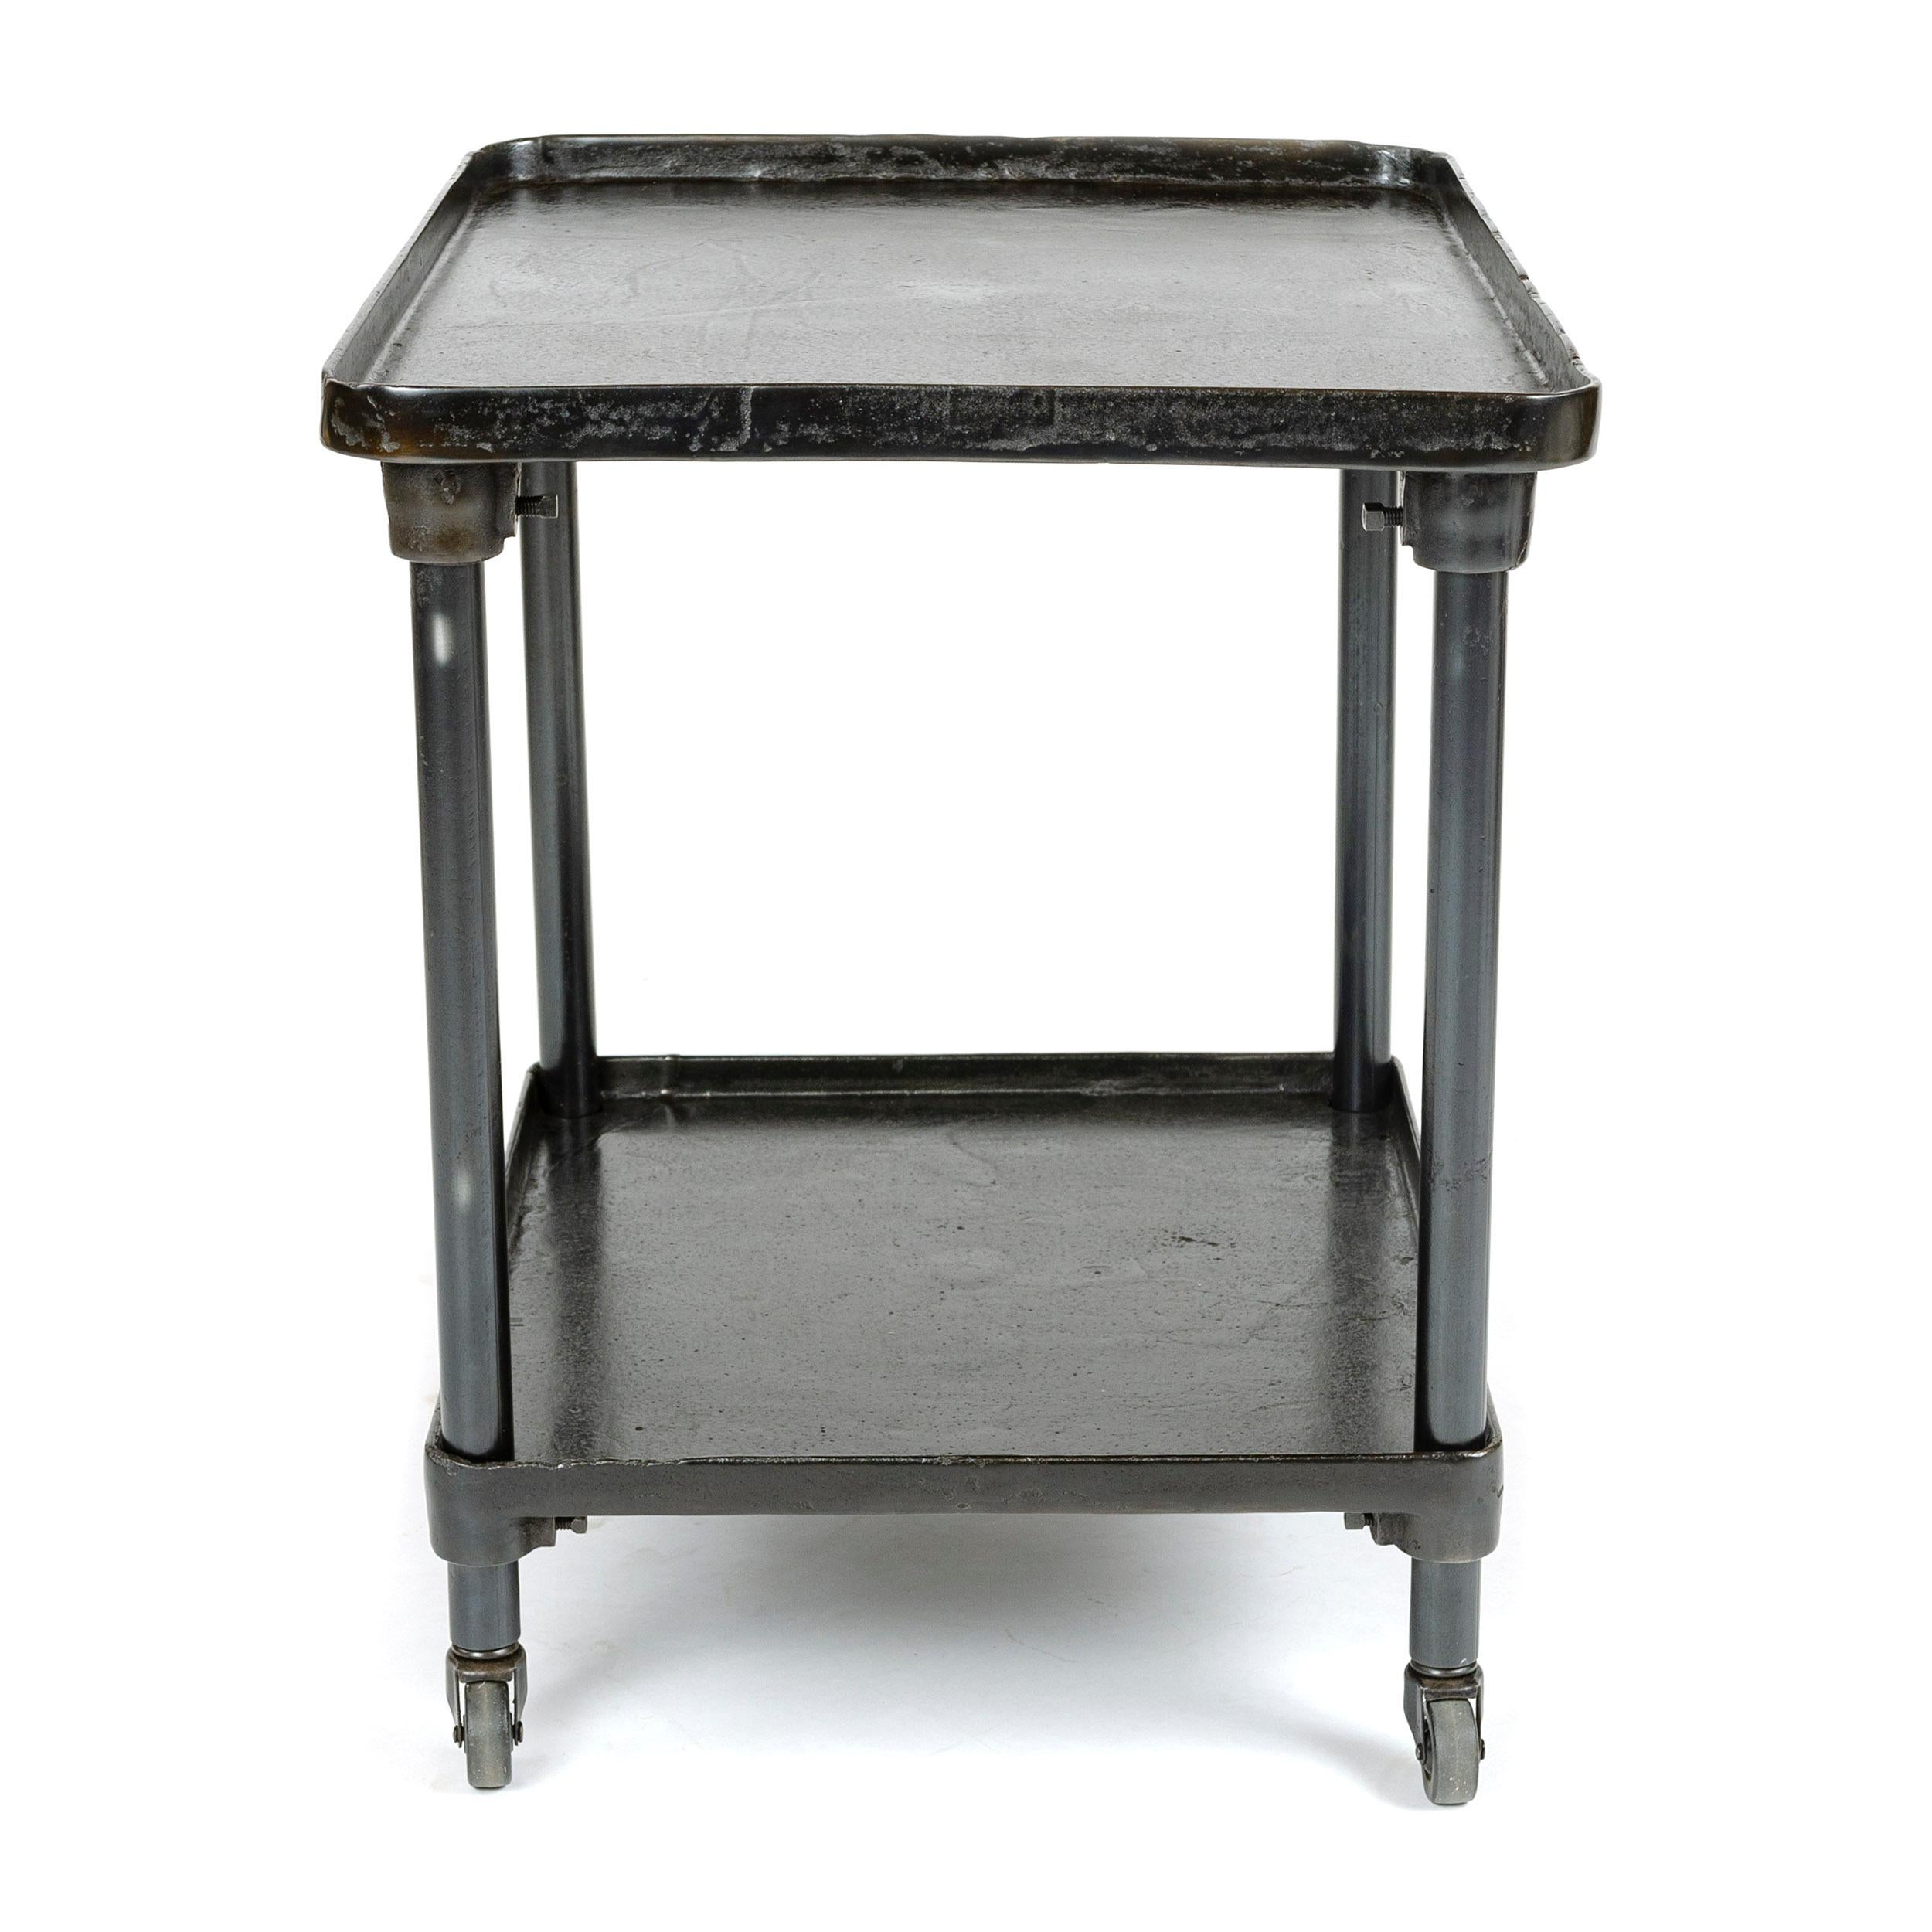 Two-tier industrial cart with an oil and wax blackened finish on castors with height adjustable lower shelf. Each shelf has rounded corners with a one inch lip around its perimeter. Diversifying from steam engine production, the J.T. Case Engine Co.